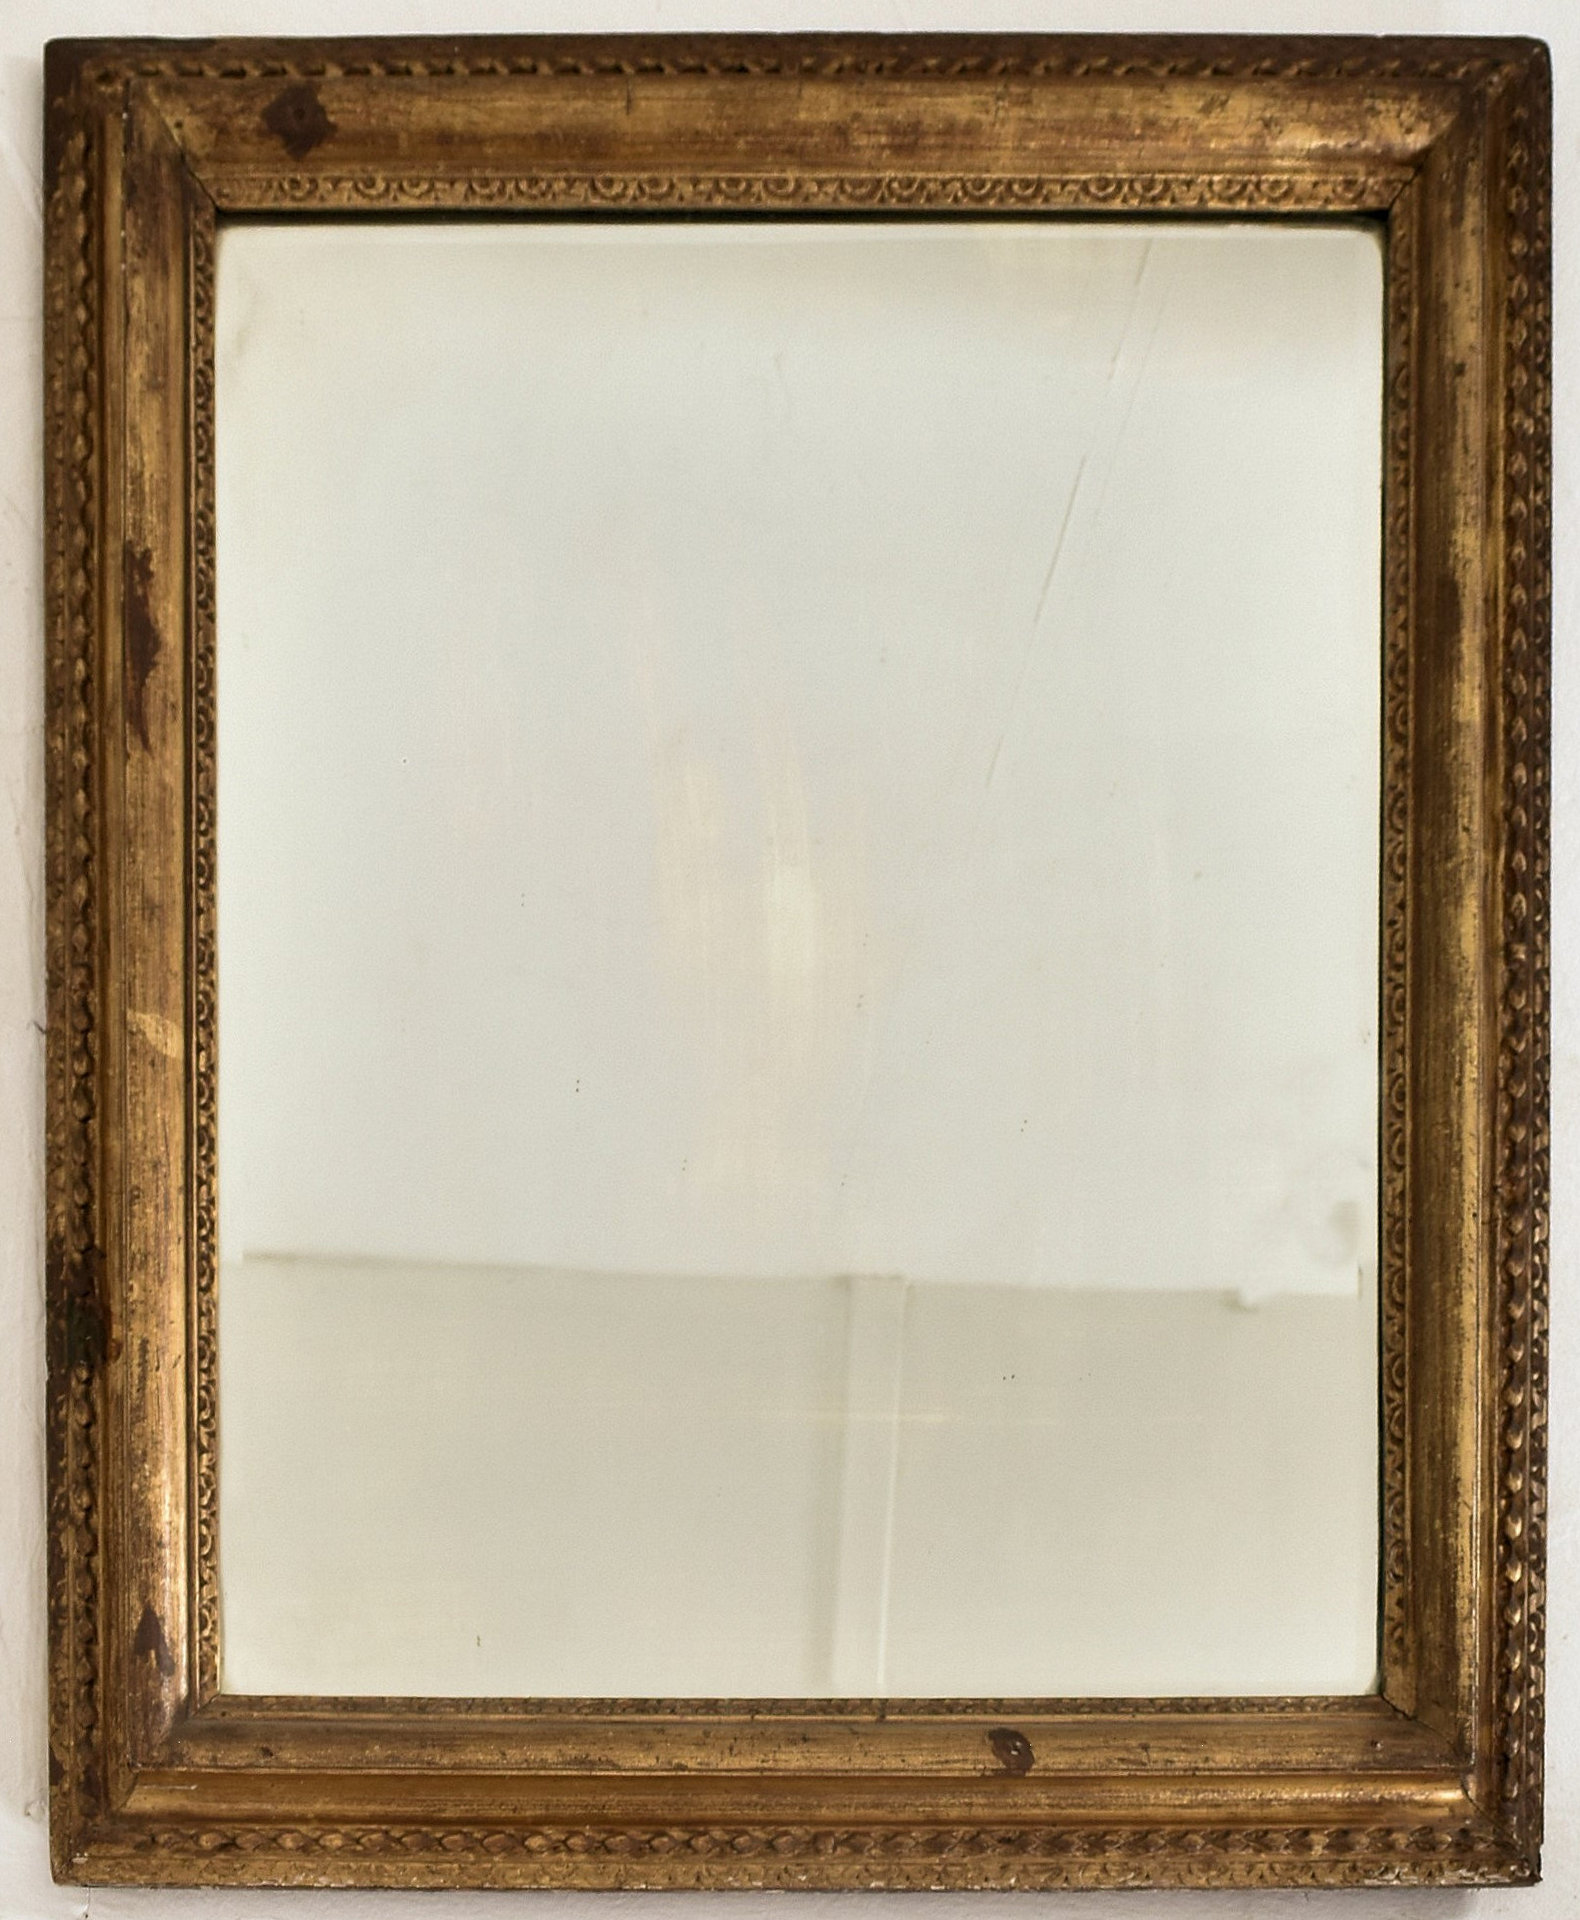 19TH CENTURY GILTWOOD AND GESSO FRAMED HANGING MIRROR - Image 2 of 6